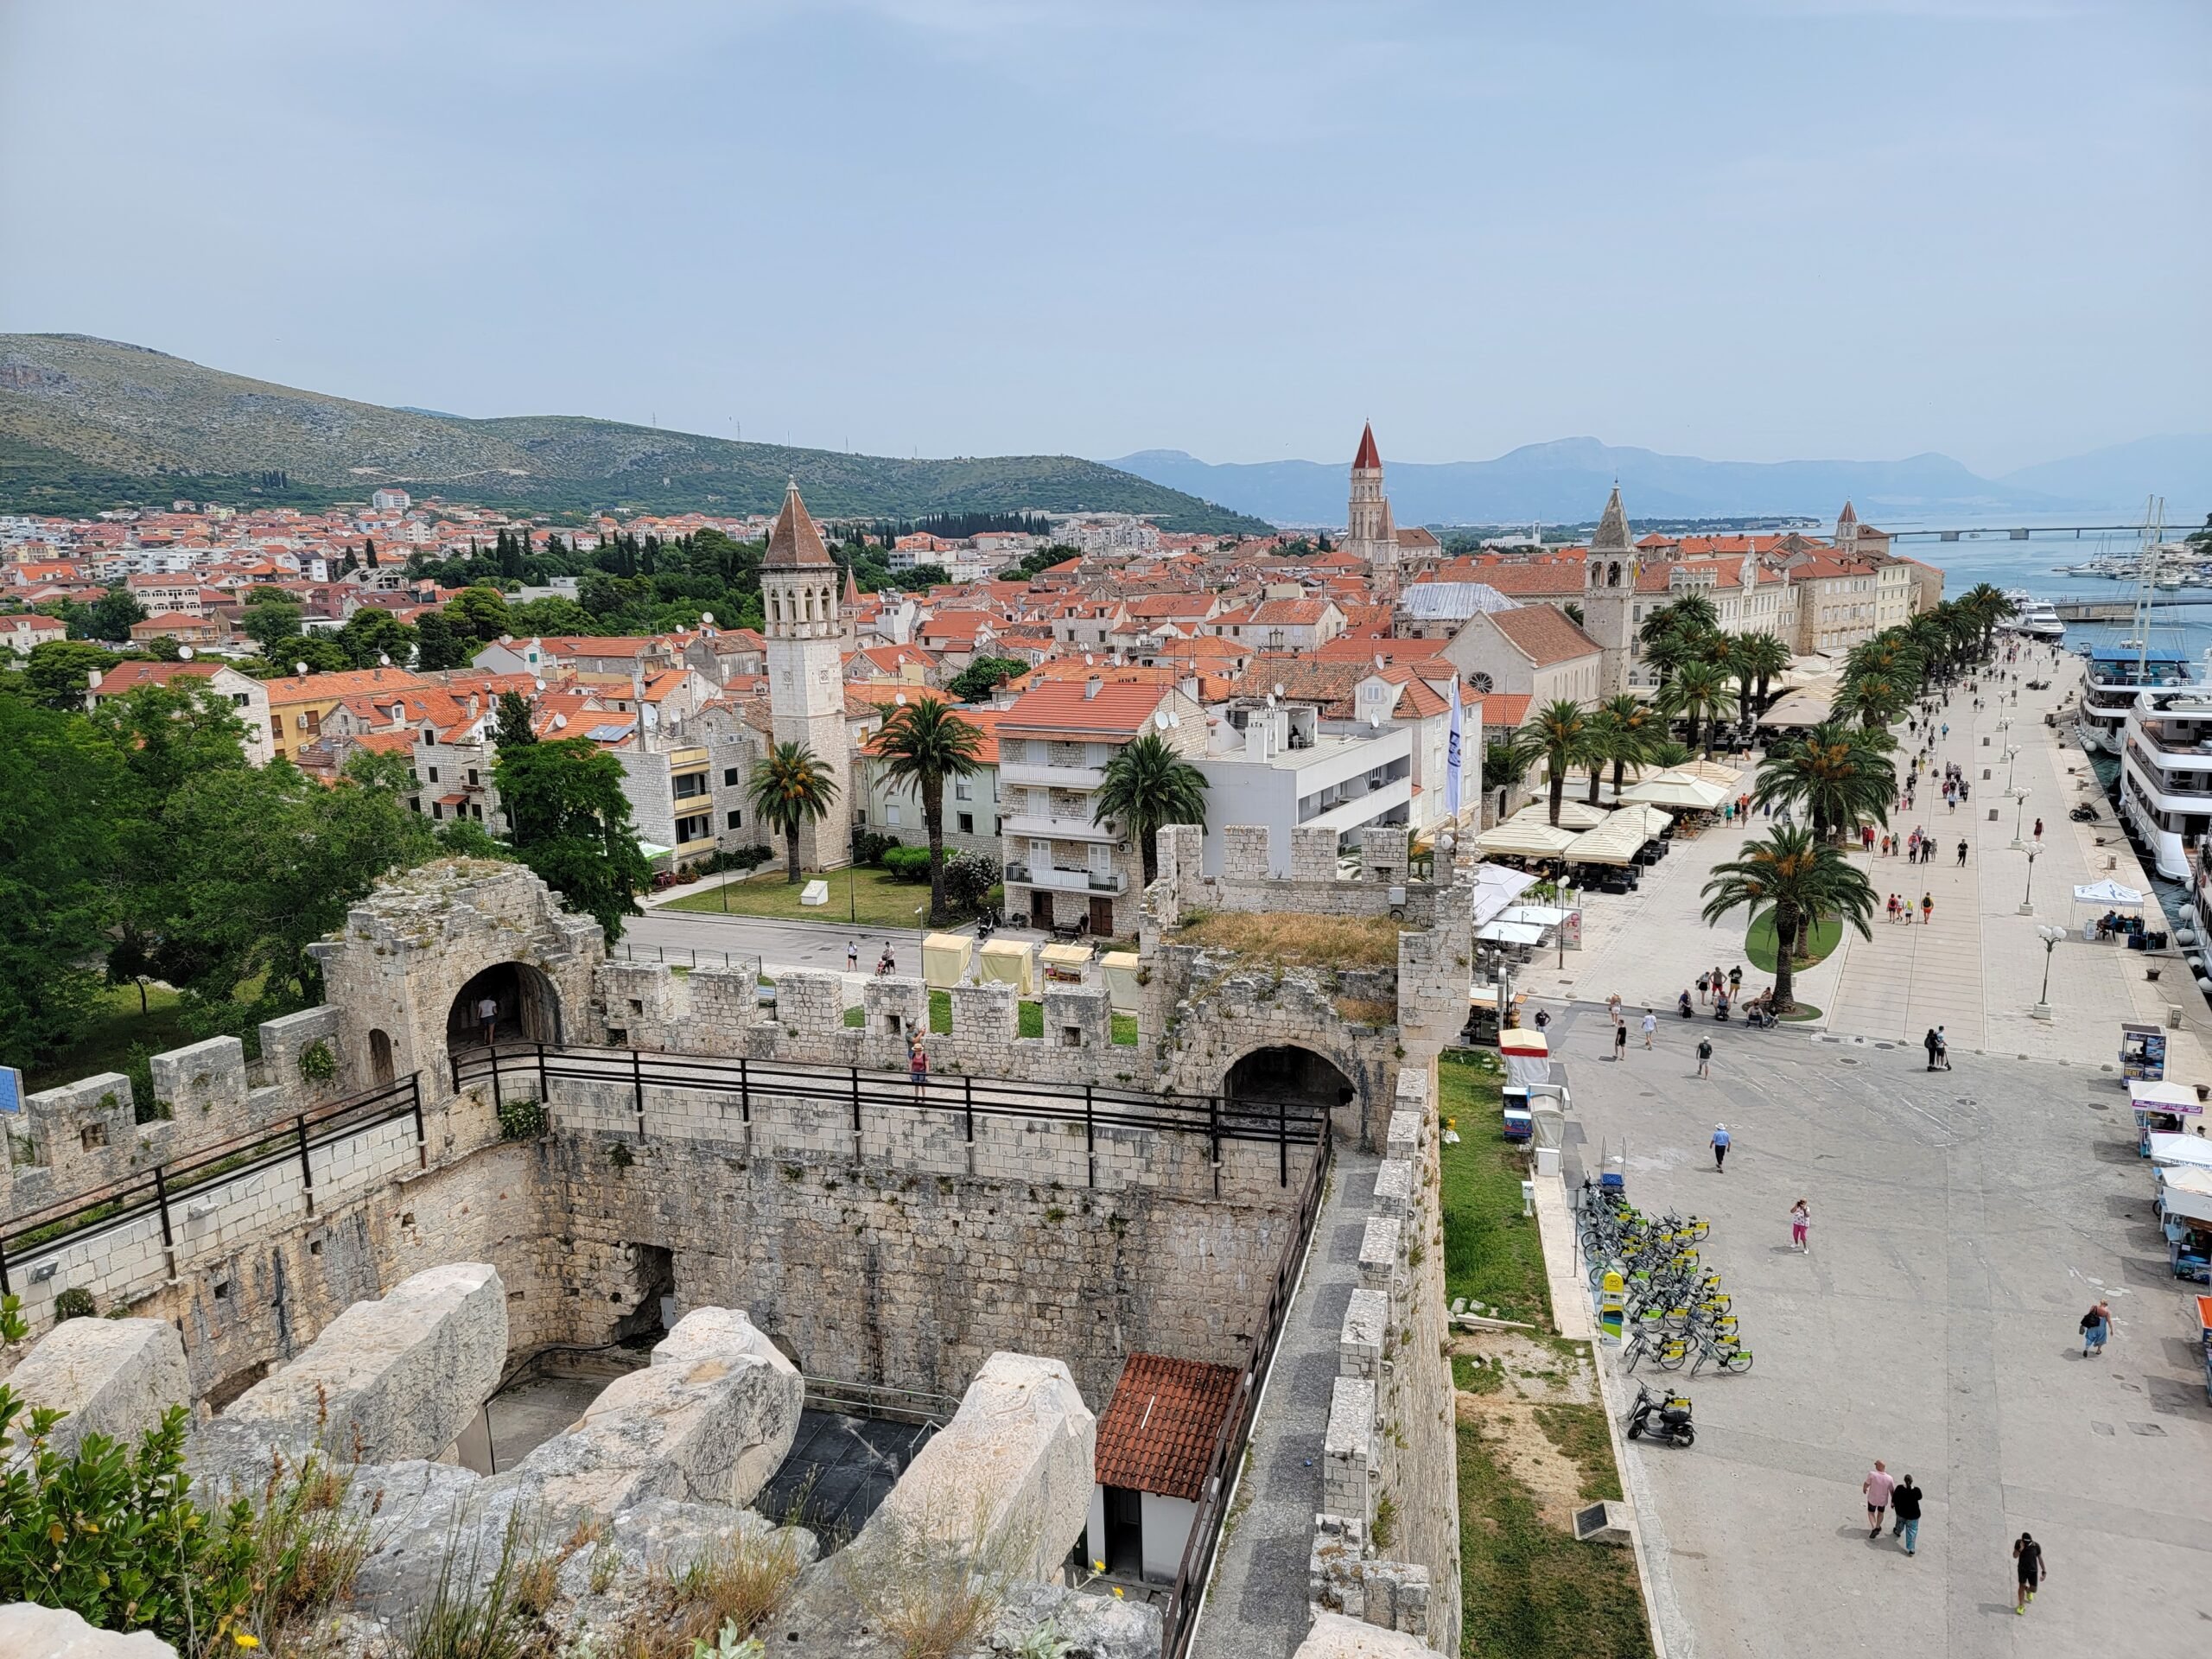 A breathtaking view of Croatia's cityscape of Trogir in spring, as seen from the top of a historic wall.